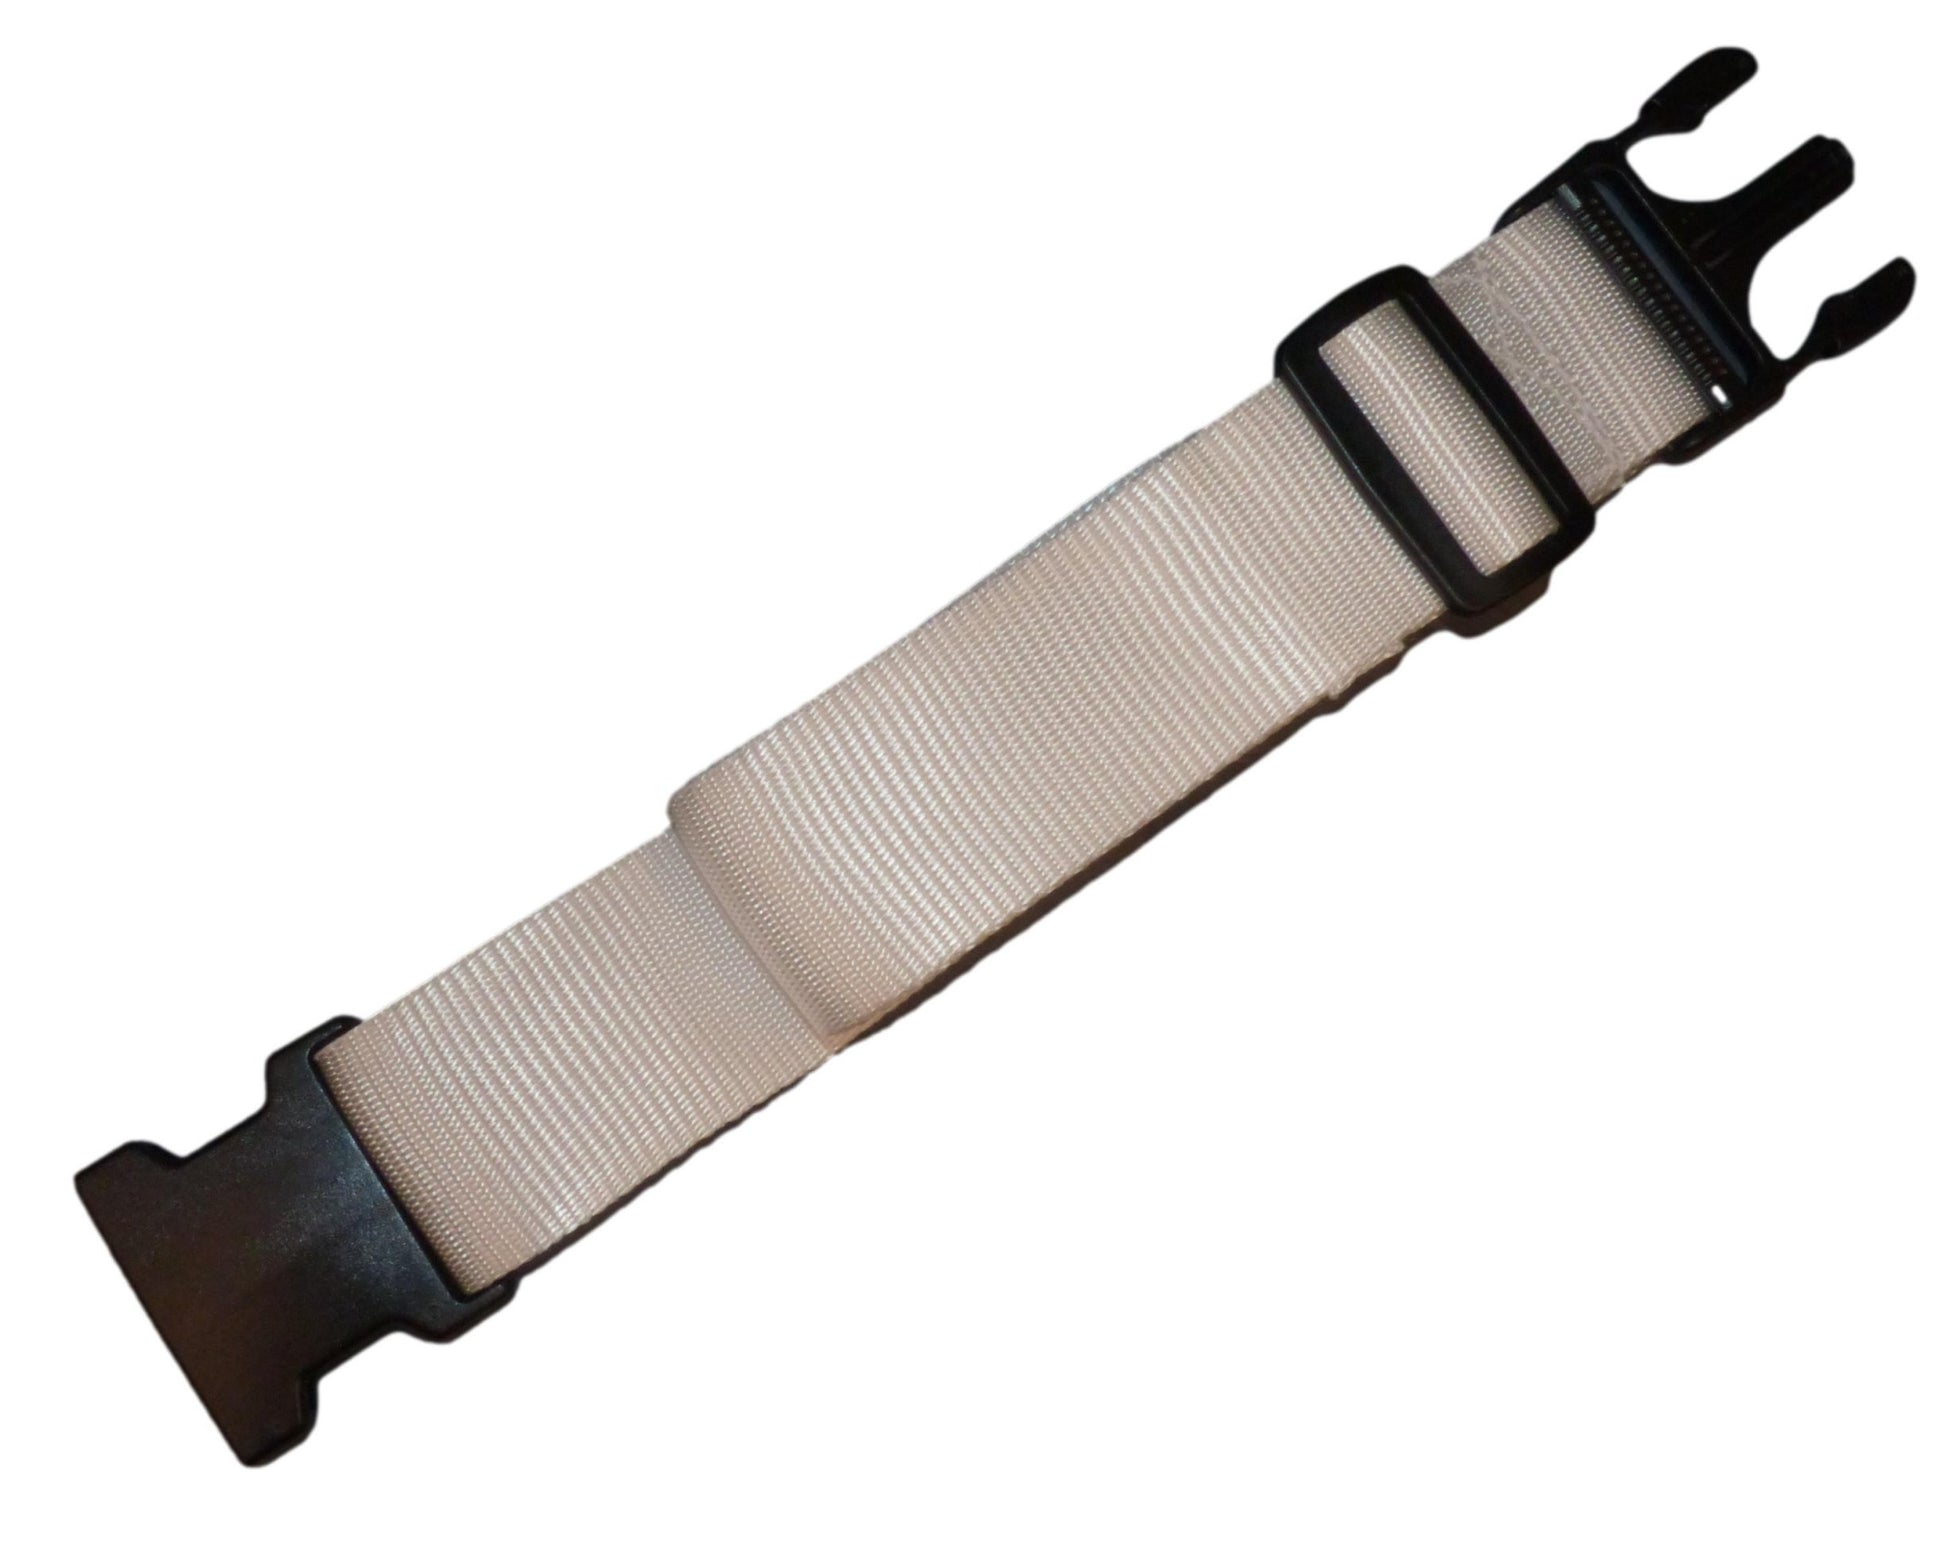 Benristraps 50mm Webbing Strap with Quick Release & Length-Adjusting Buckles in white